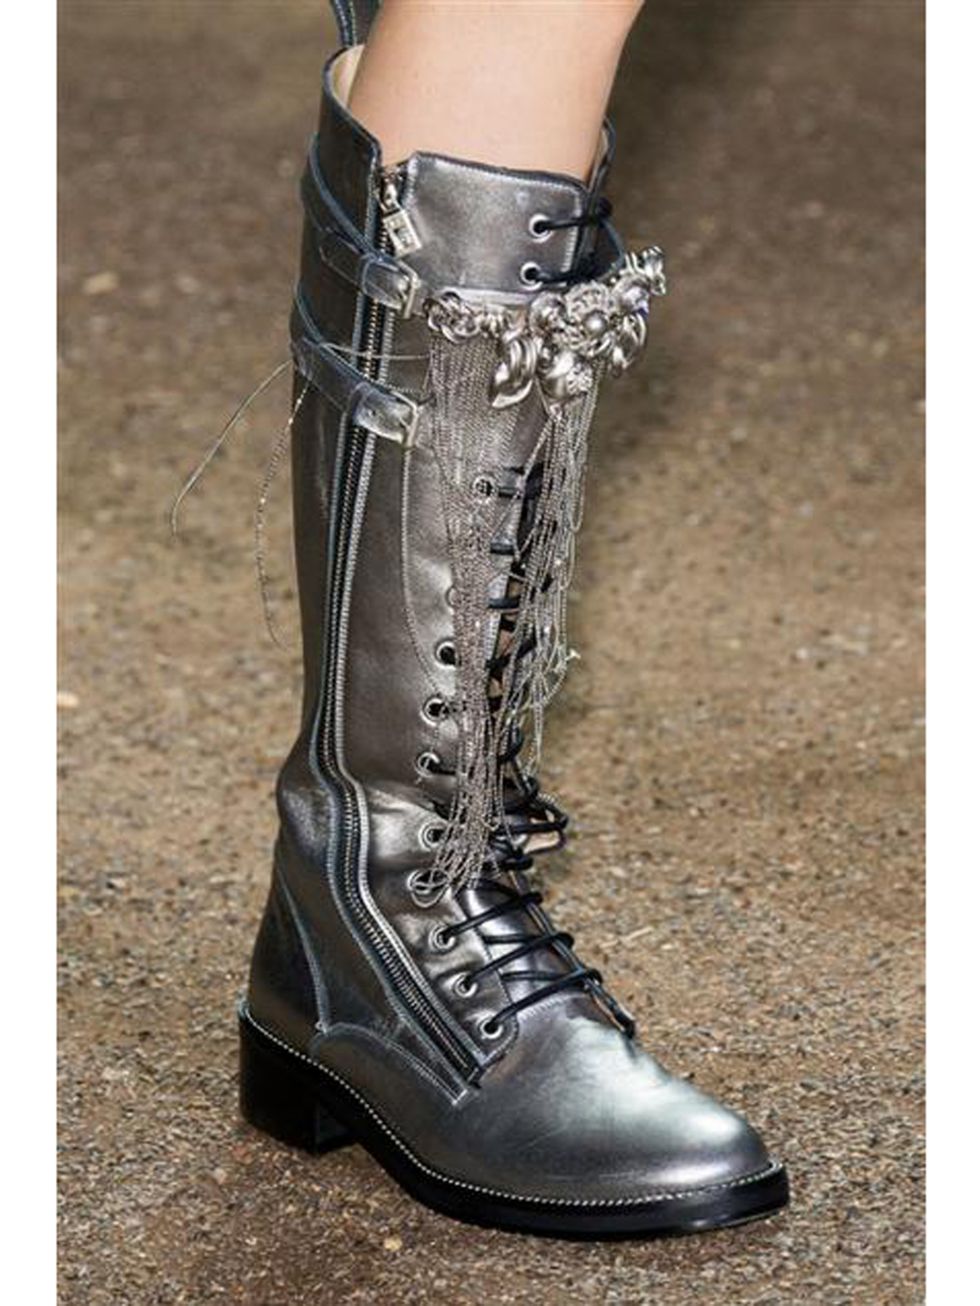 Shoe, Boot, Fashion, Leather, Silver, Work boots, Fashion design, Steel, Steel-toe boot, Synthetic rubber, 